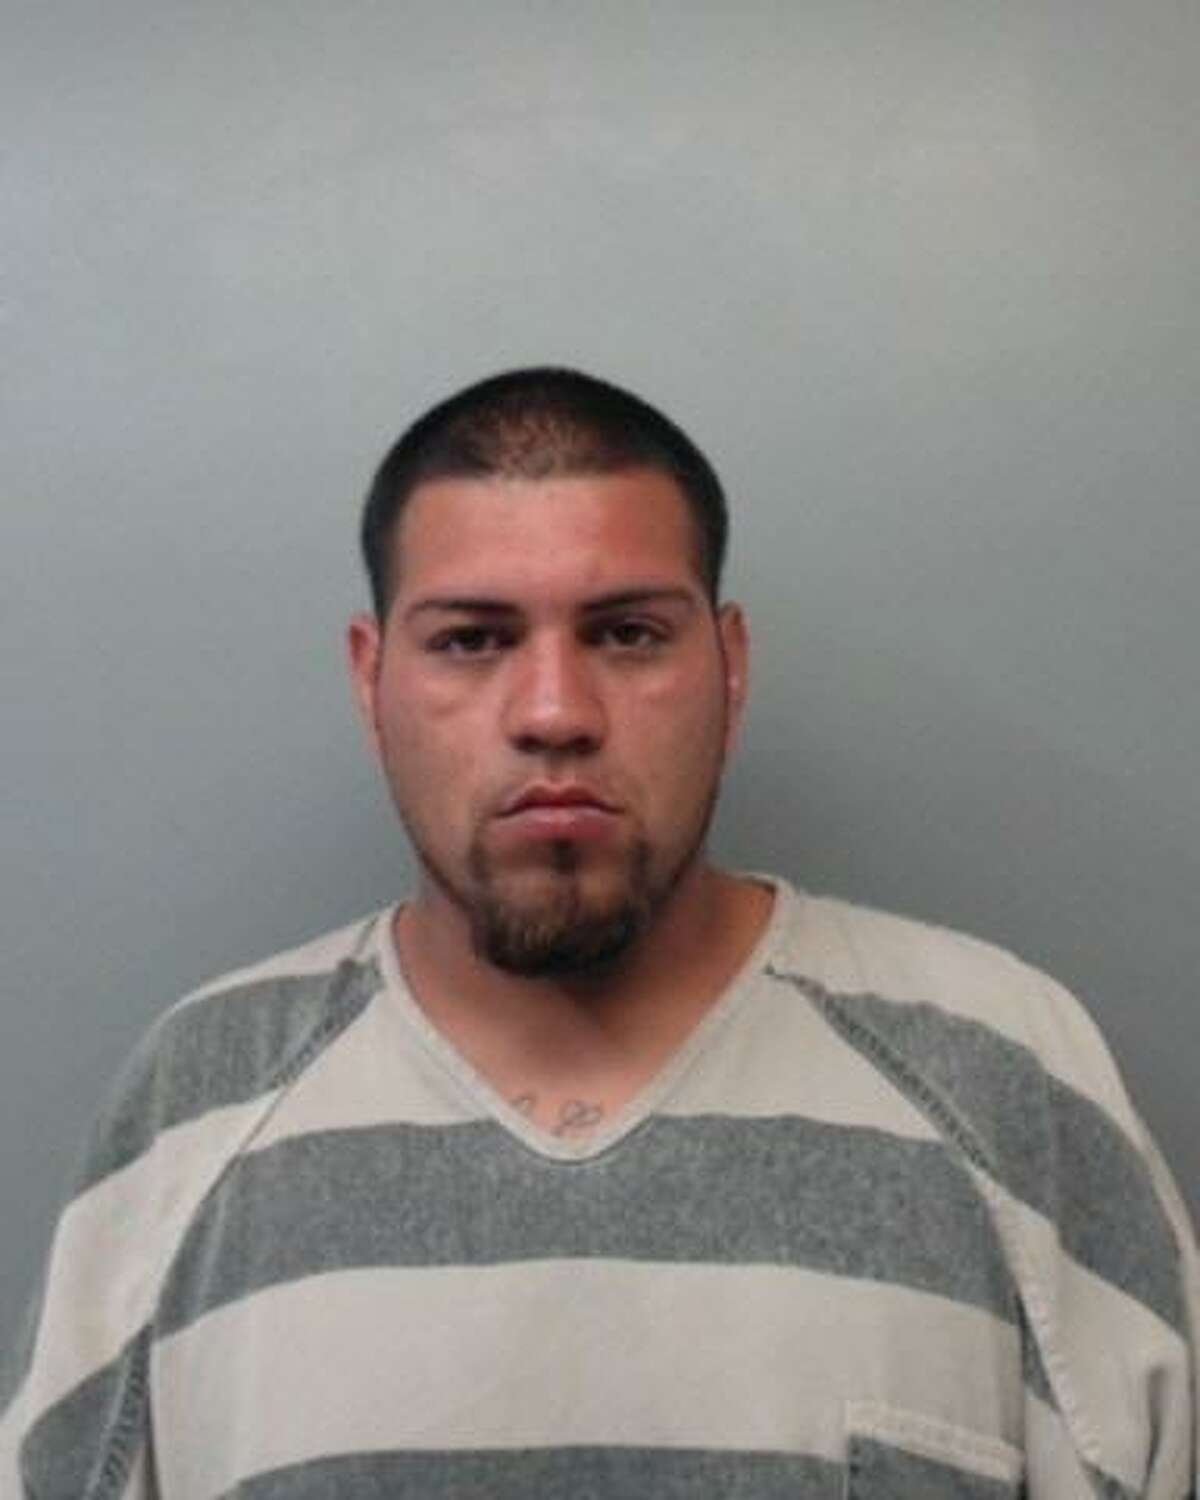 Daniel Cuellar, 23, was charged with aggravated assault with knife or cutting instrument and aggravated assault, family violence.